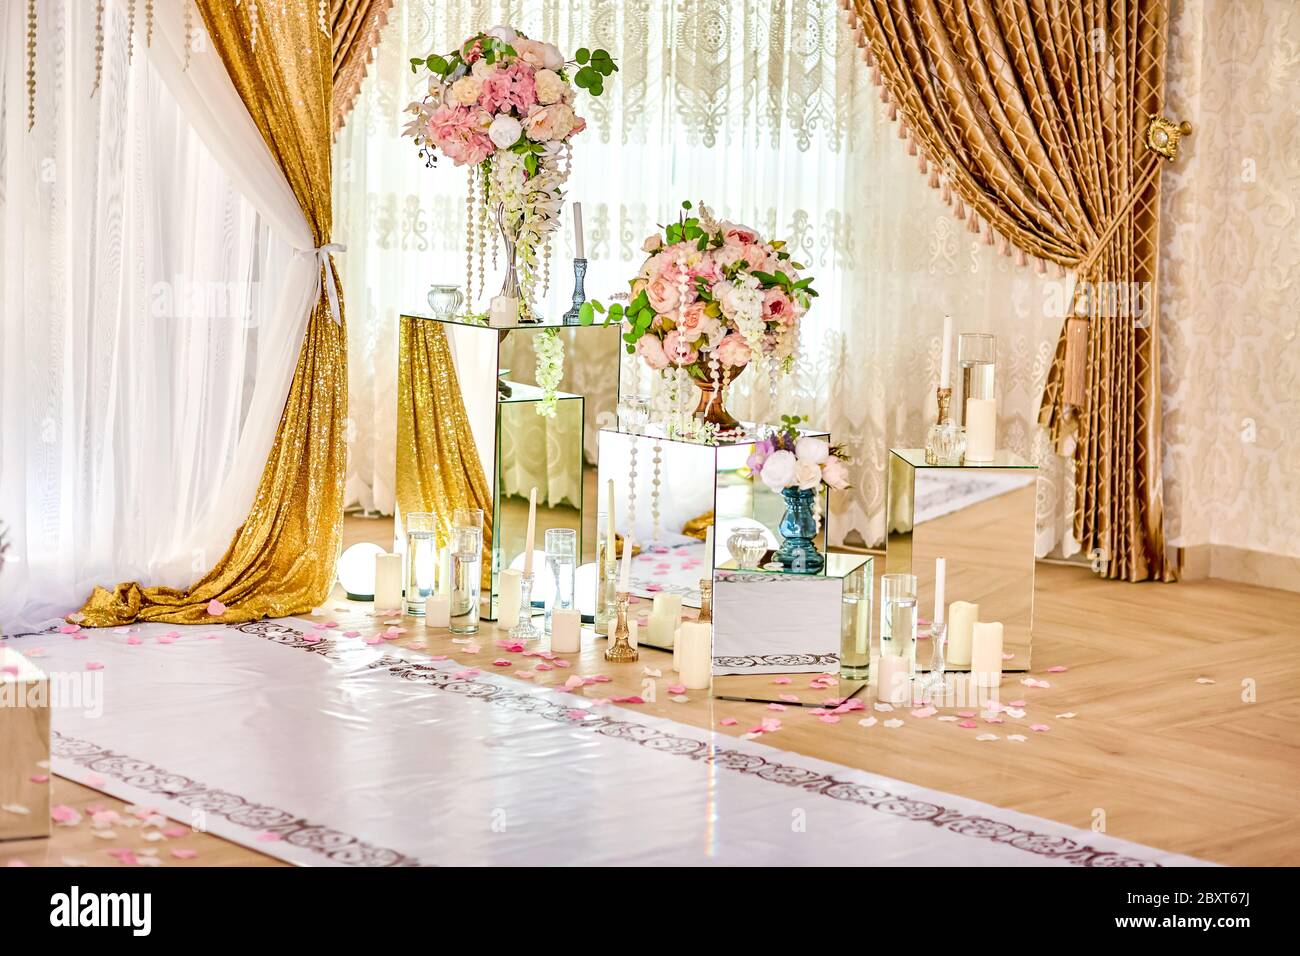 Wedding decoration in the restaurant using mirror and artificial flowers. Registration zone for bride and groom. Wedding ideas for decoration. u Stock Photo